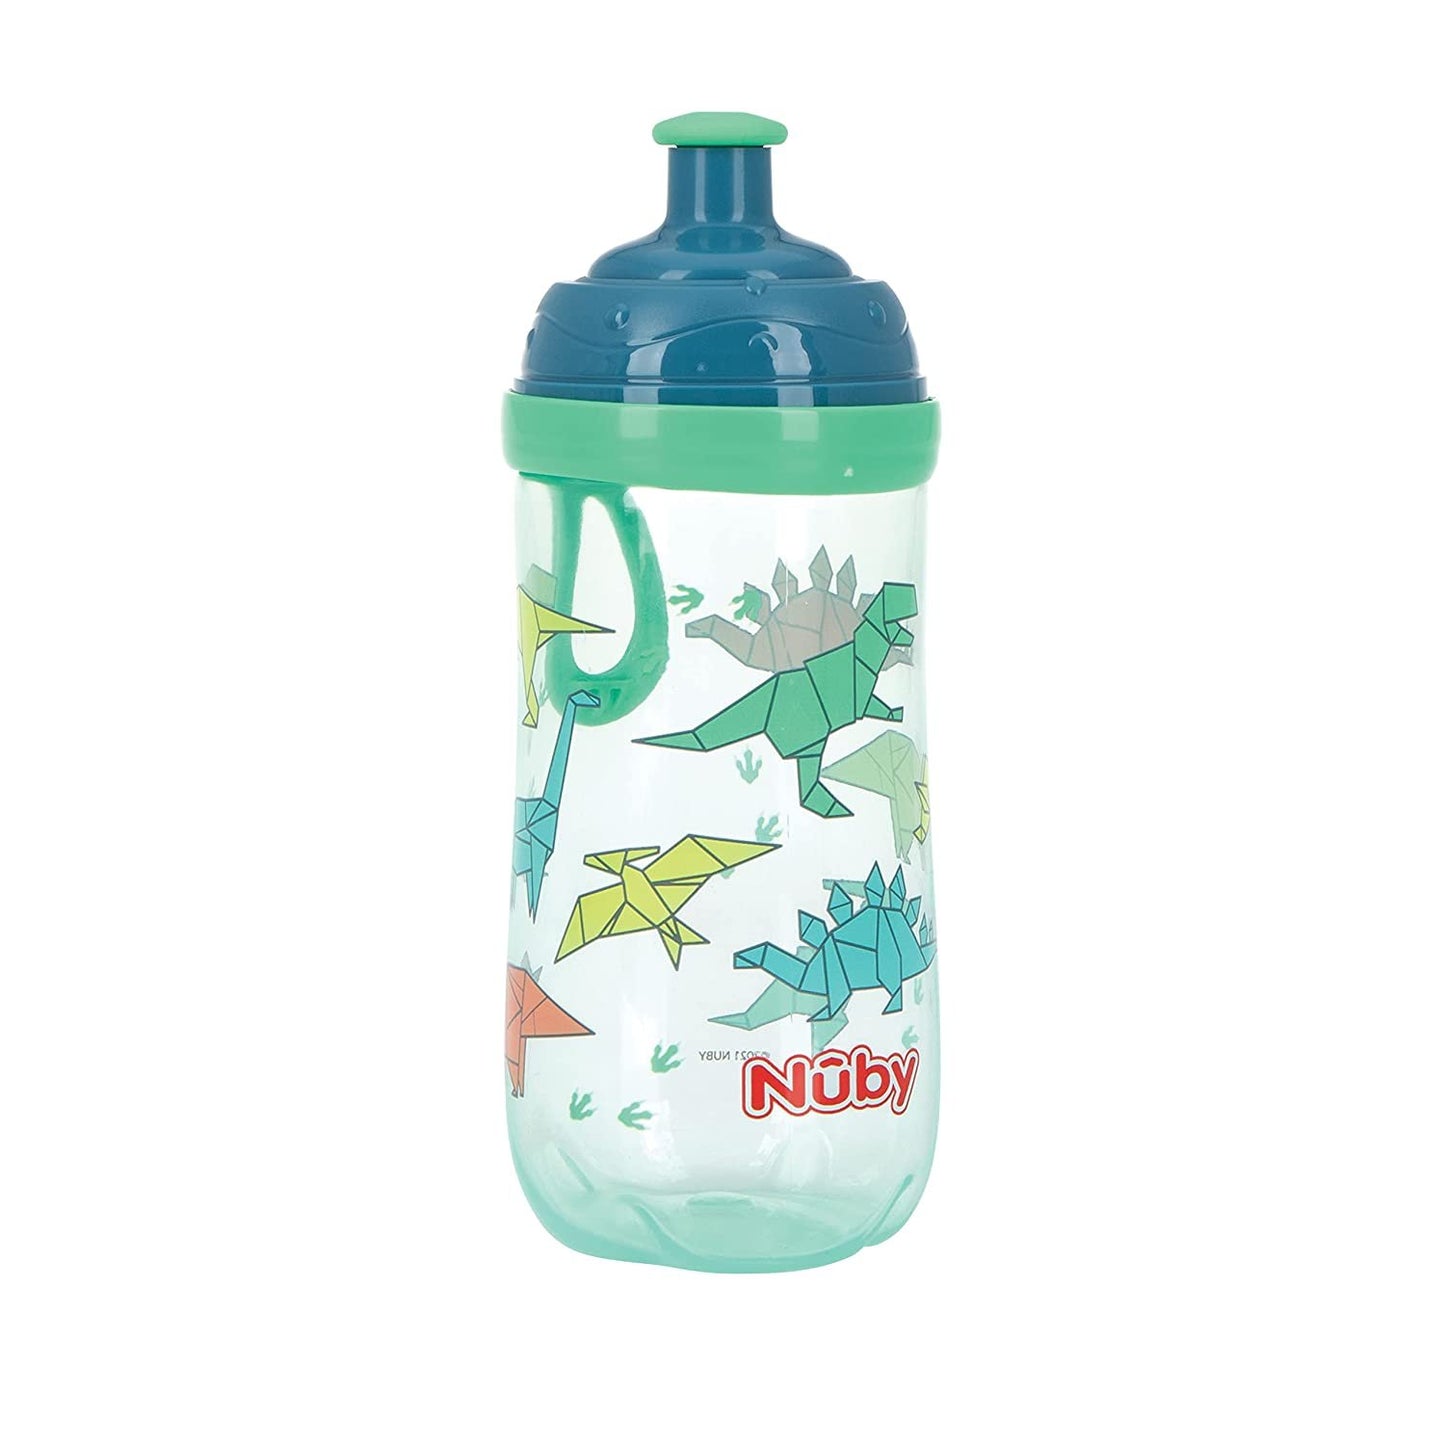 Nuby 2-Stage Busy Sipper Cup with No-Spill Silicone Spout and Free-Flow Pop-Up, 12 Ounce,Assorted( Colors/Designs May Vary)